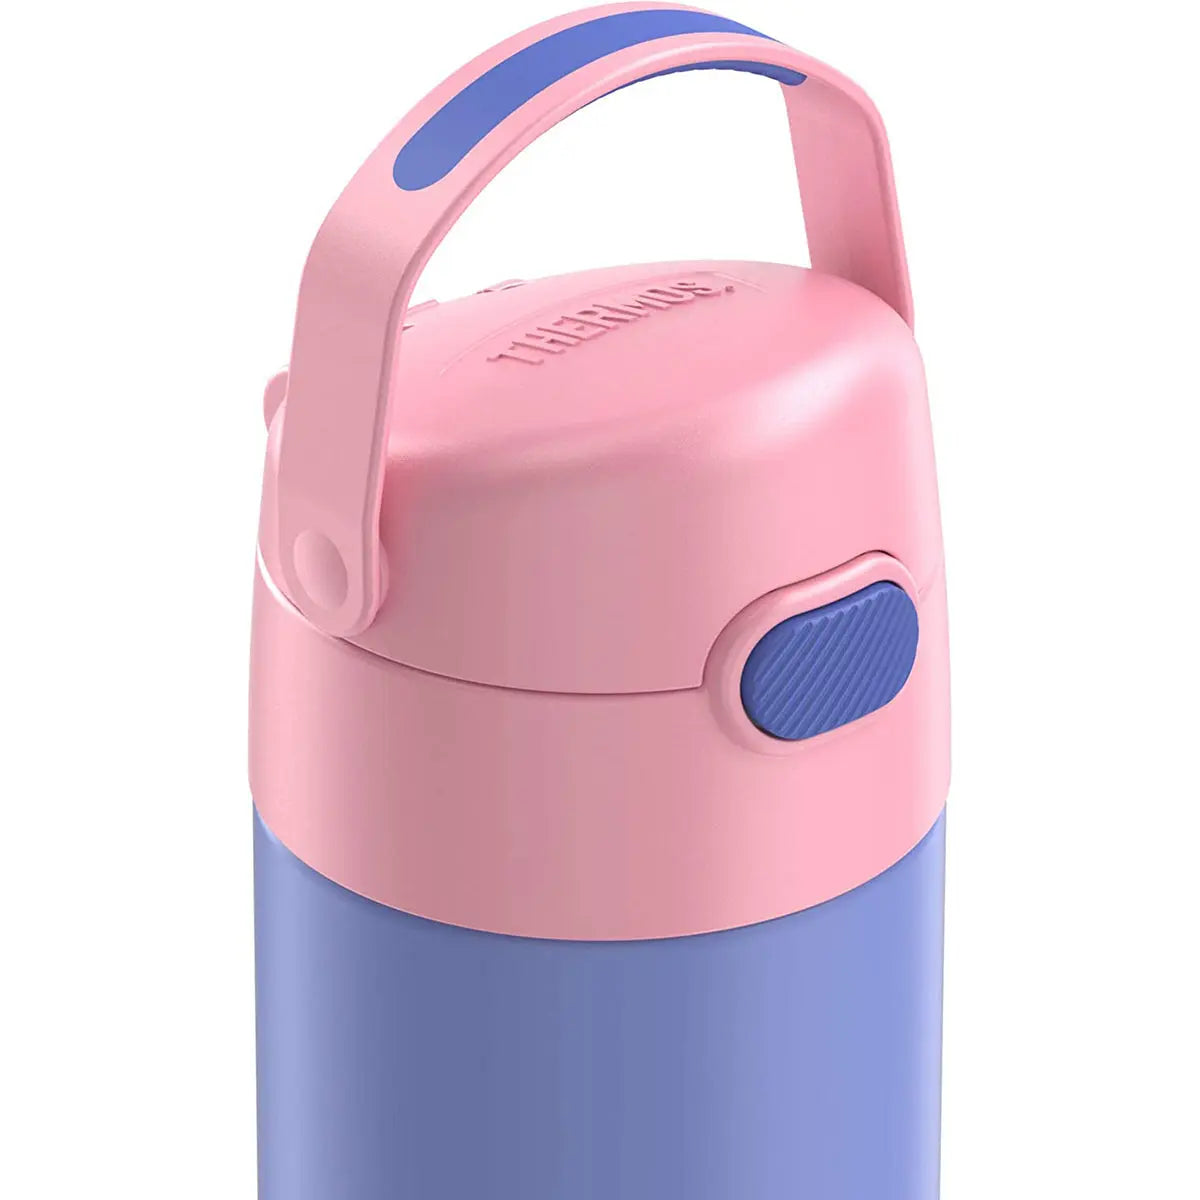 Thermos 12 oz. Kid's Funtainer Vacuum Insulated Stainless Steel Water Bottle Thermos